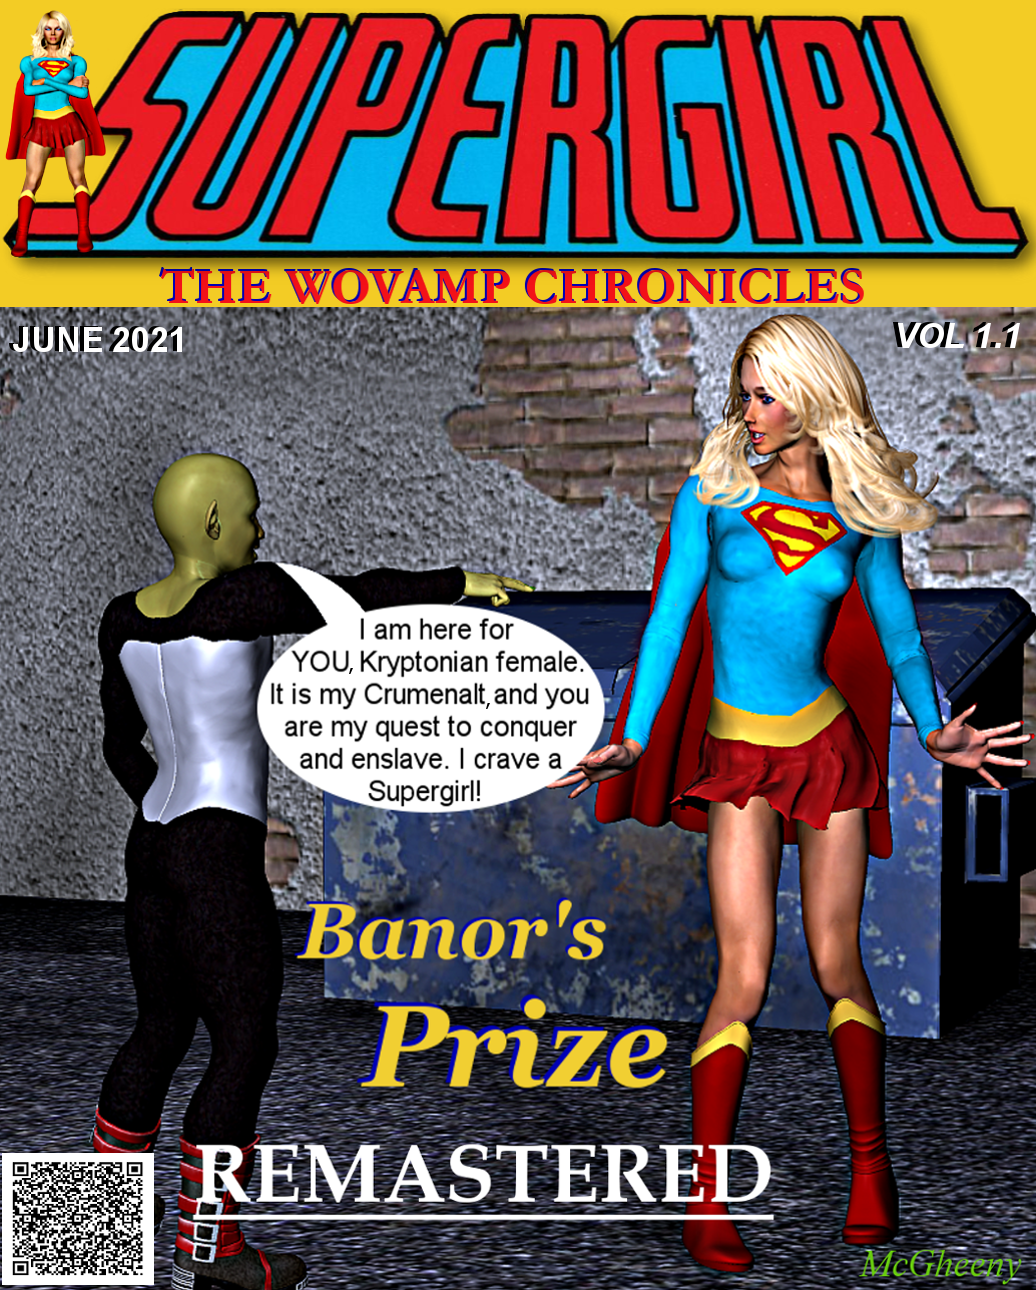 0 Supergirl in Banors Prize THE WOVAMP CHRONICLES Vol 1.1 COVER.png